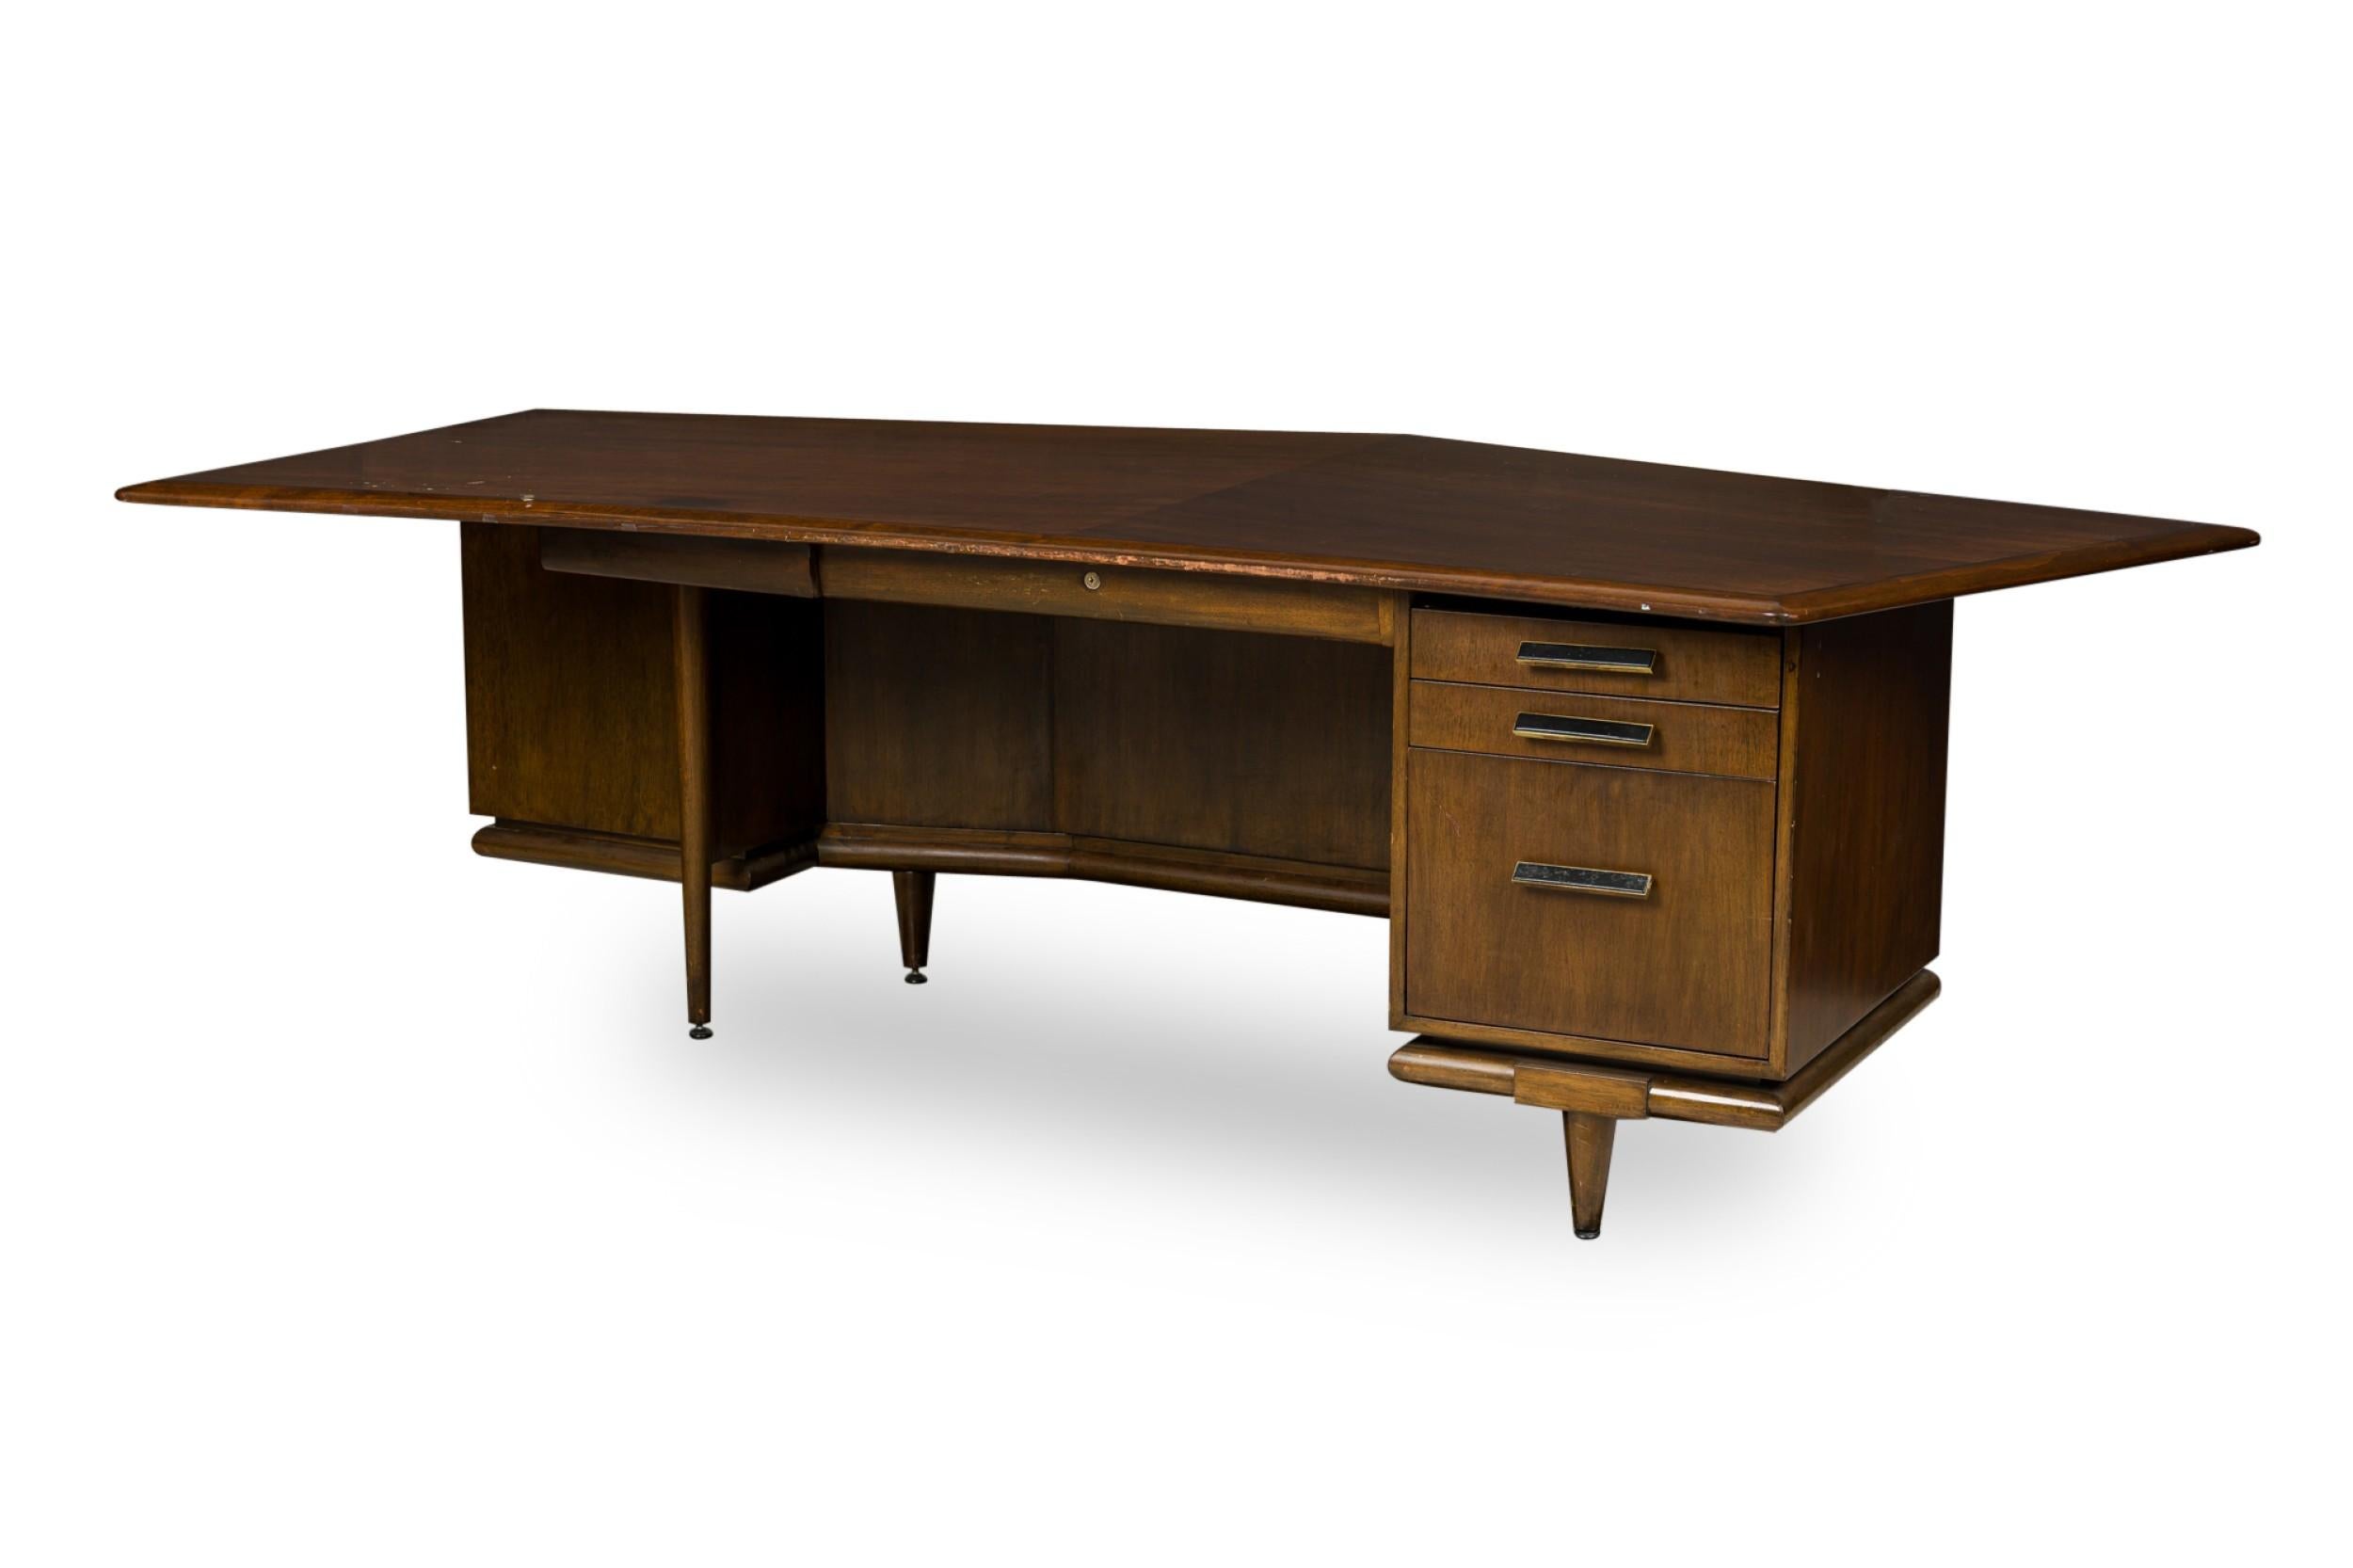 American Mid-Century walnut executive desk having an angular top with a centerdrawer and 3 stacked side drawers designed with a vanity front panel (custom made by MONTEVERDI YOUNG)
